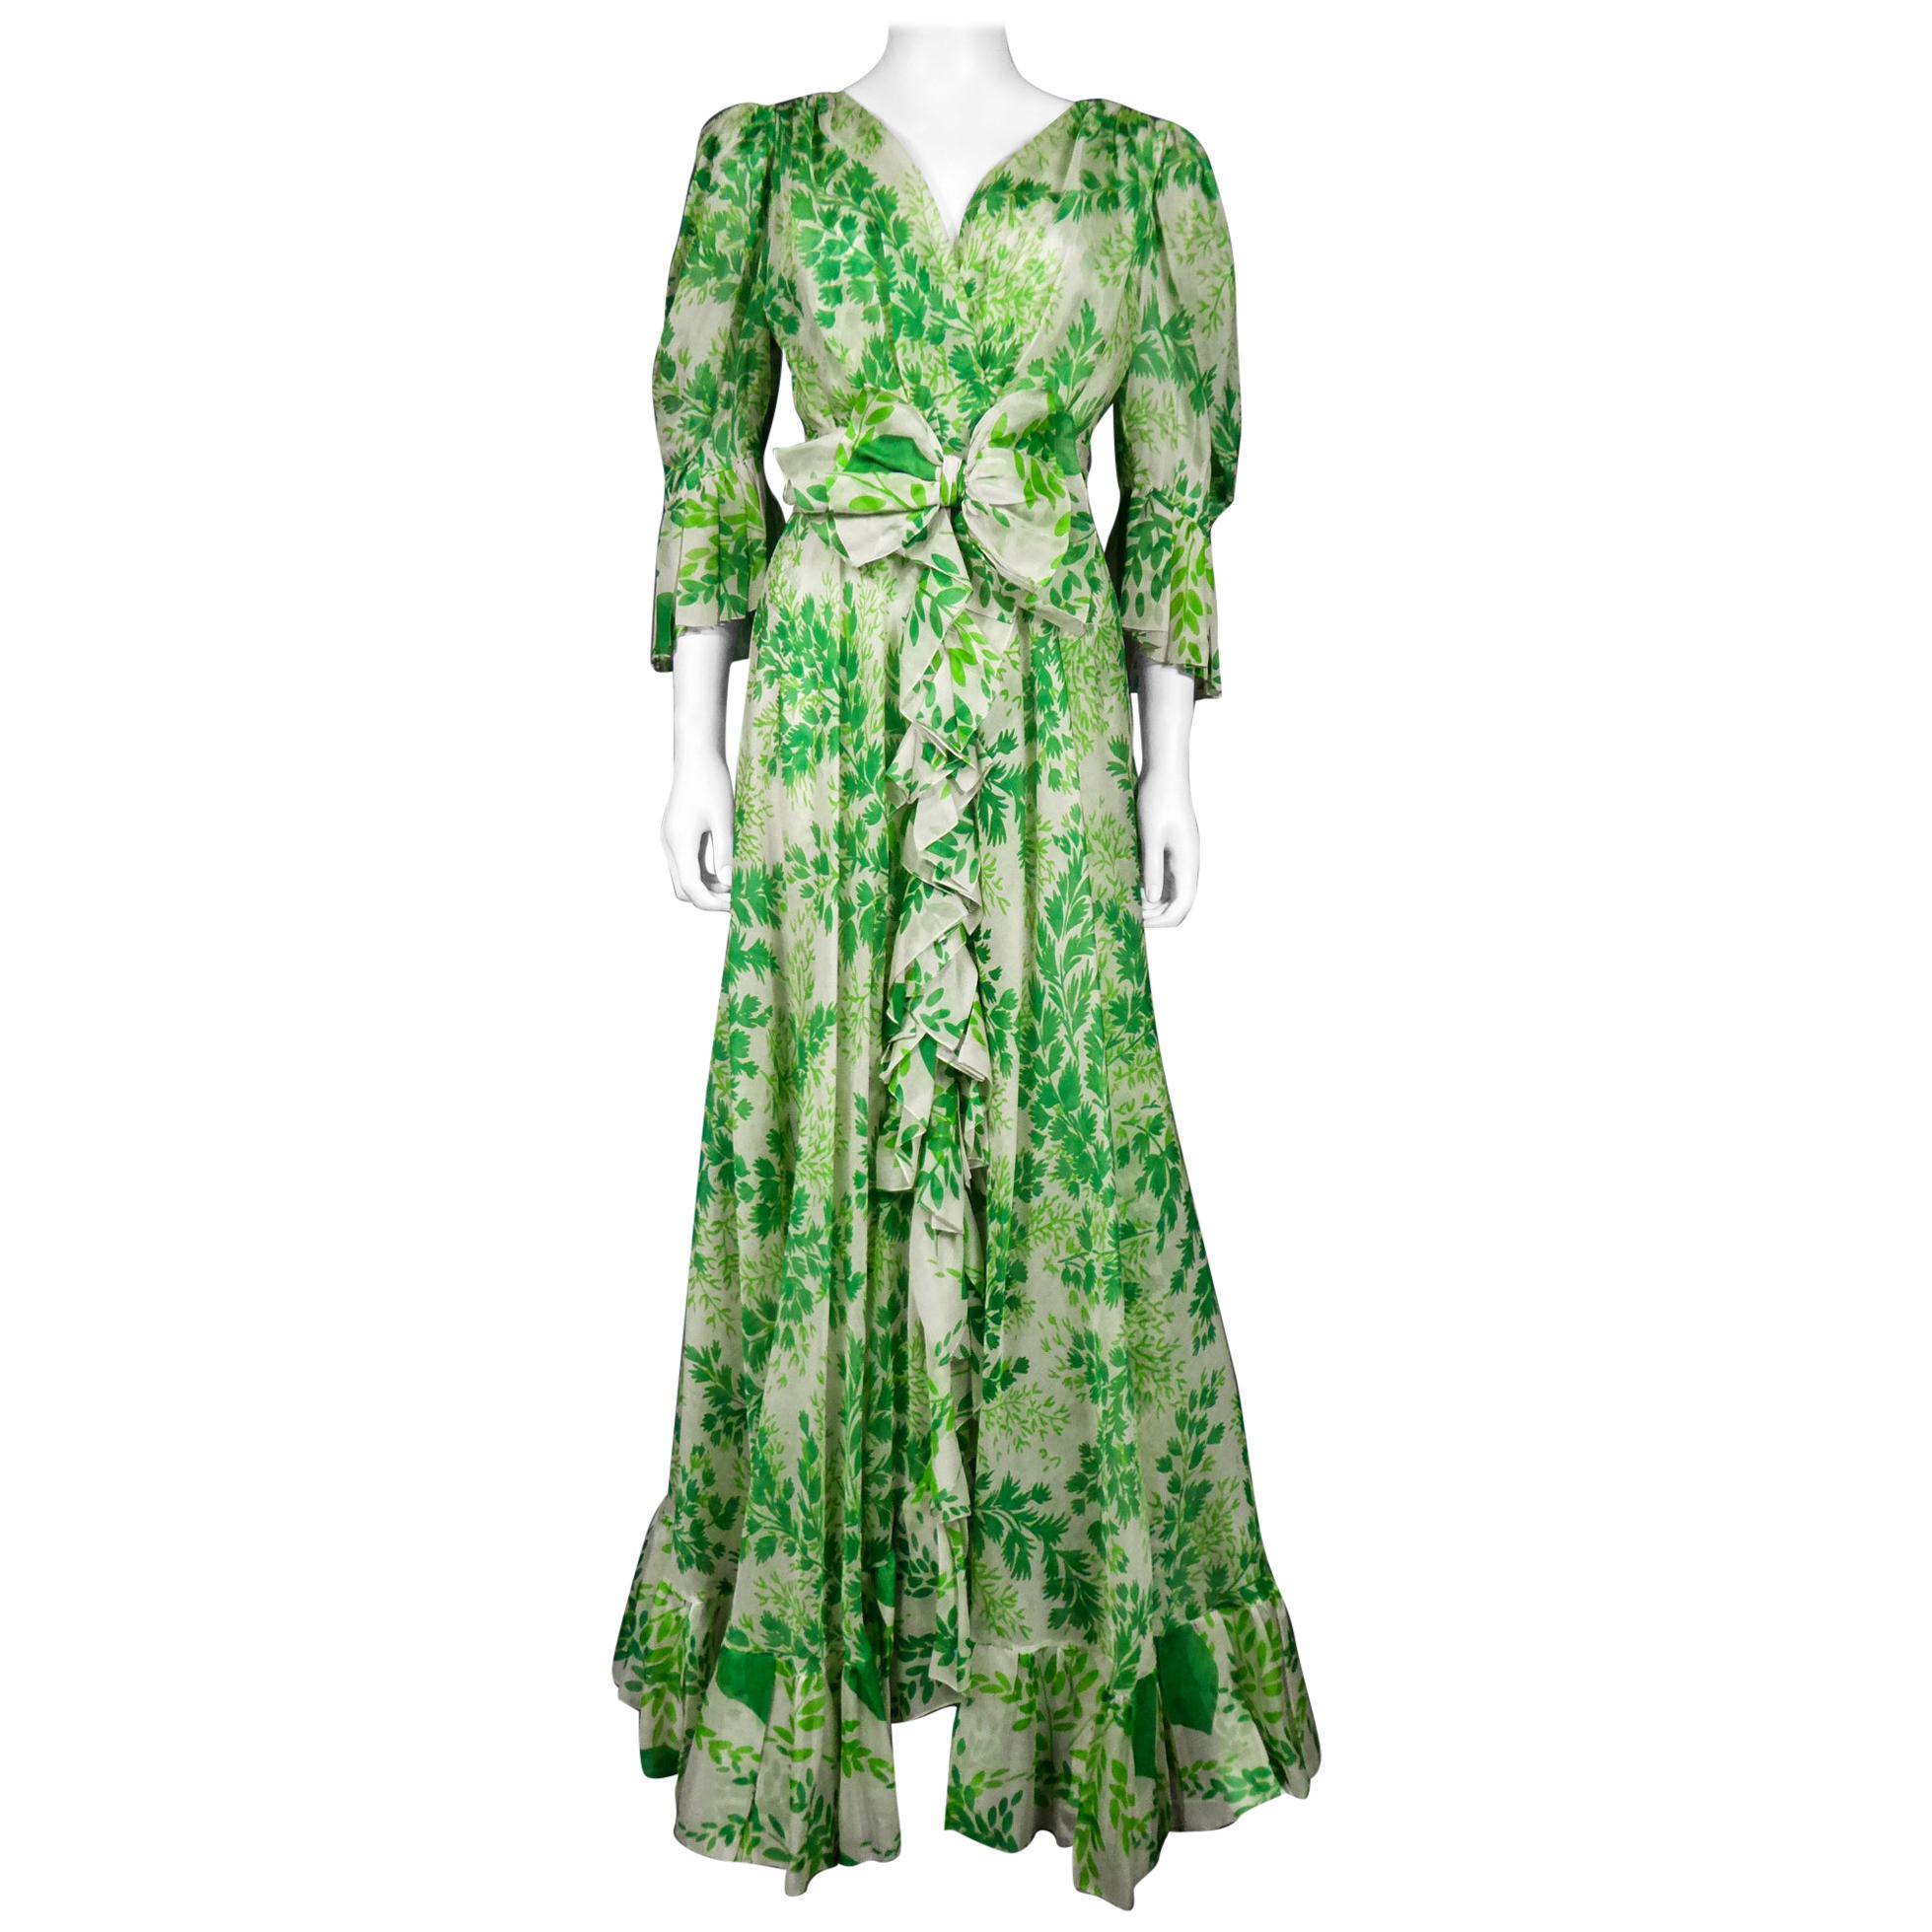 An Yves Saint Laurent Couture Printed Chiffon Dress Numbered 47988 ...